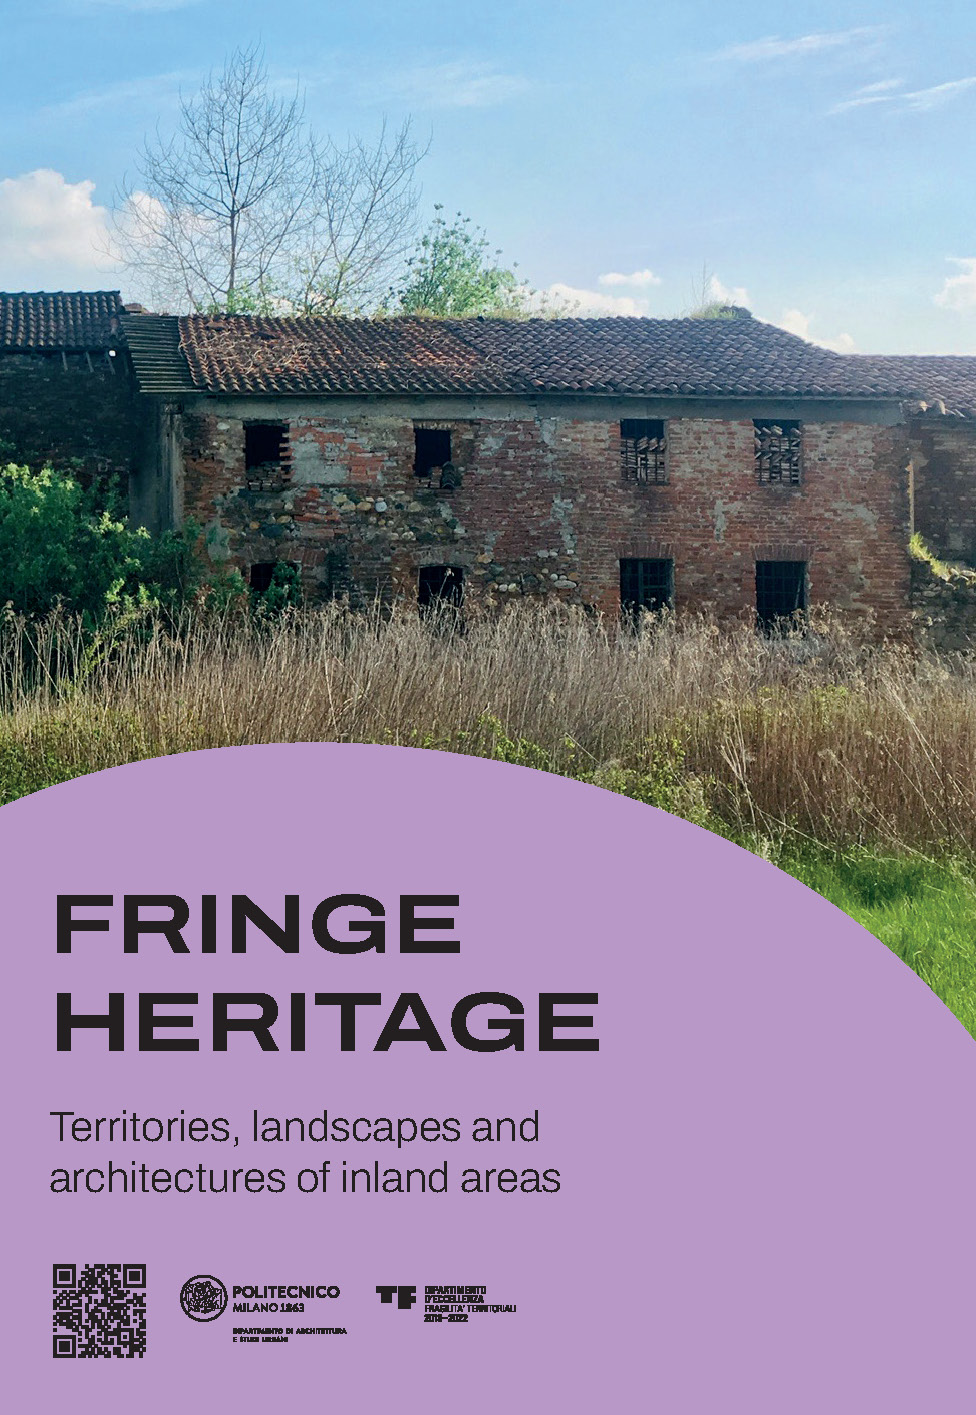 FRINGE HERITAGE. Territories, landscapes and architectures of inland areas